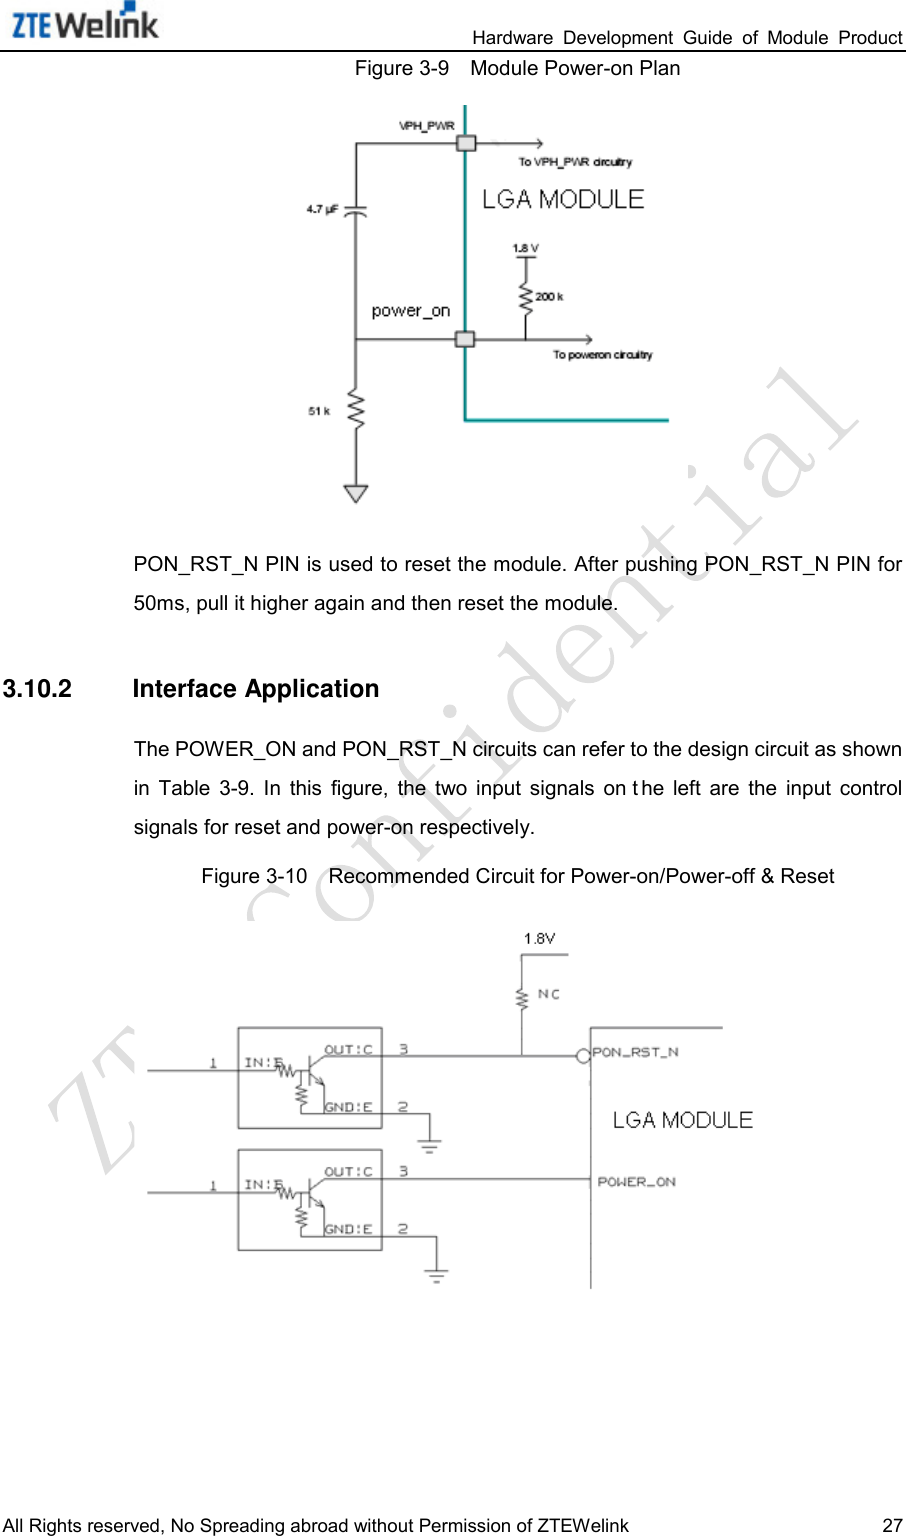                                                                 Hardware  Development  Guide  of  Module  Product All Rights reserved, No Spreading abroad without Permission of ZTEWelink 27 Figure 3-9    Module Power-on Plan  PON_RST_N PIN is used to reset the module. After pushing PON_RST_N PIN for 50ms, pull it higher again and then reset the module. 3.10.2 Interface Application The POWER_ON and PON_RST_N circuits can refer to the design circuit as shown in  Table  3-9.  In  this  figure,  the  two  input  signals  on t he  left  are  the  input  control signals for reset and power-on respectively.   Figure 3-10    Recommended Circuit for Power-on/Power-off &amp; Reset  